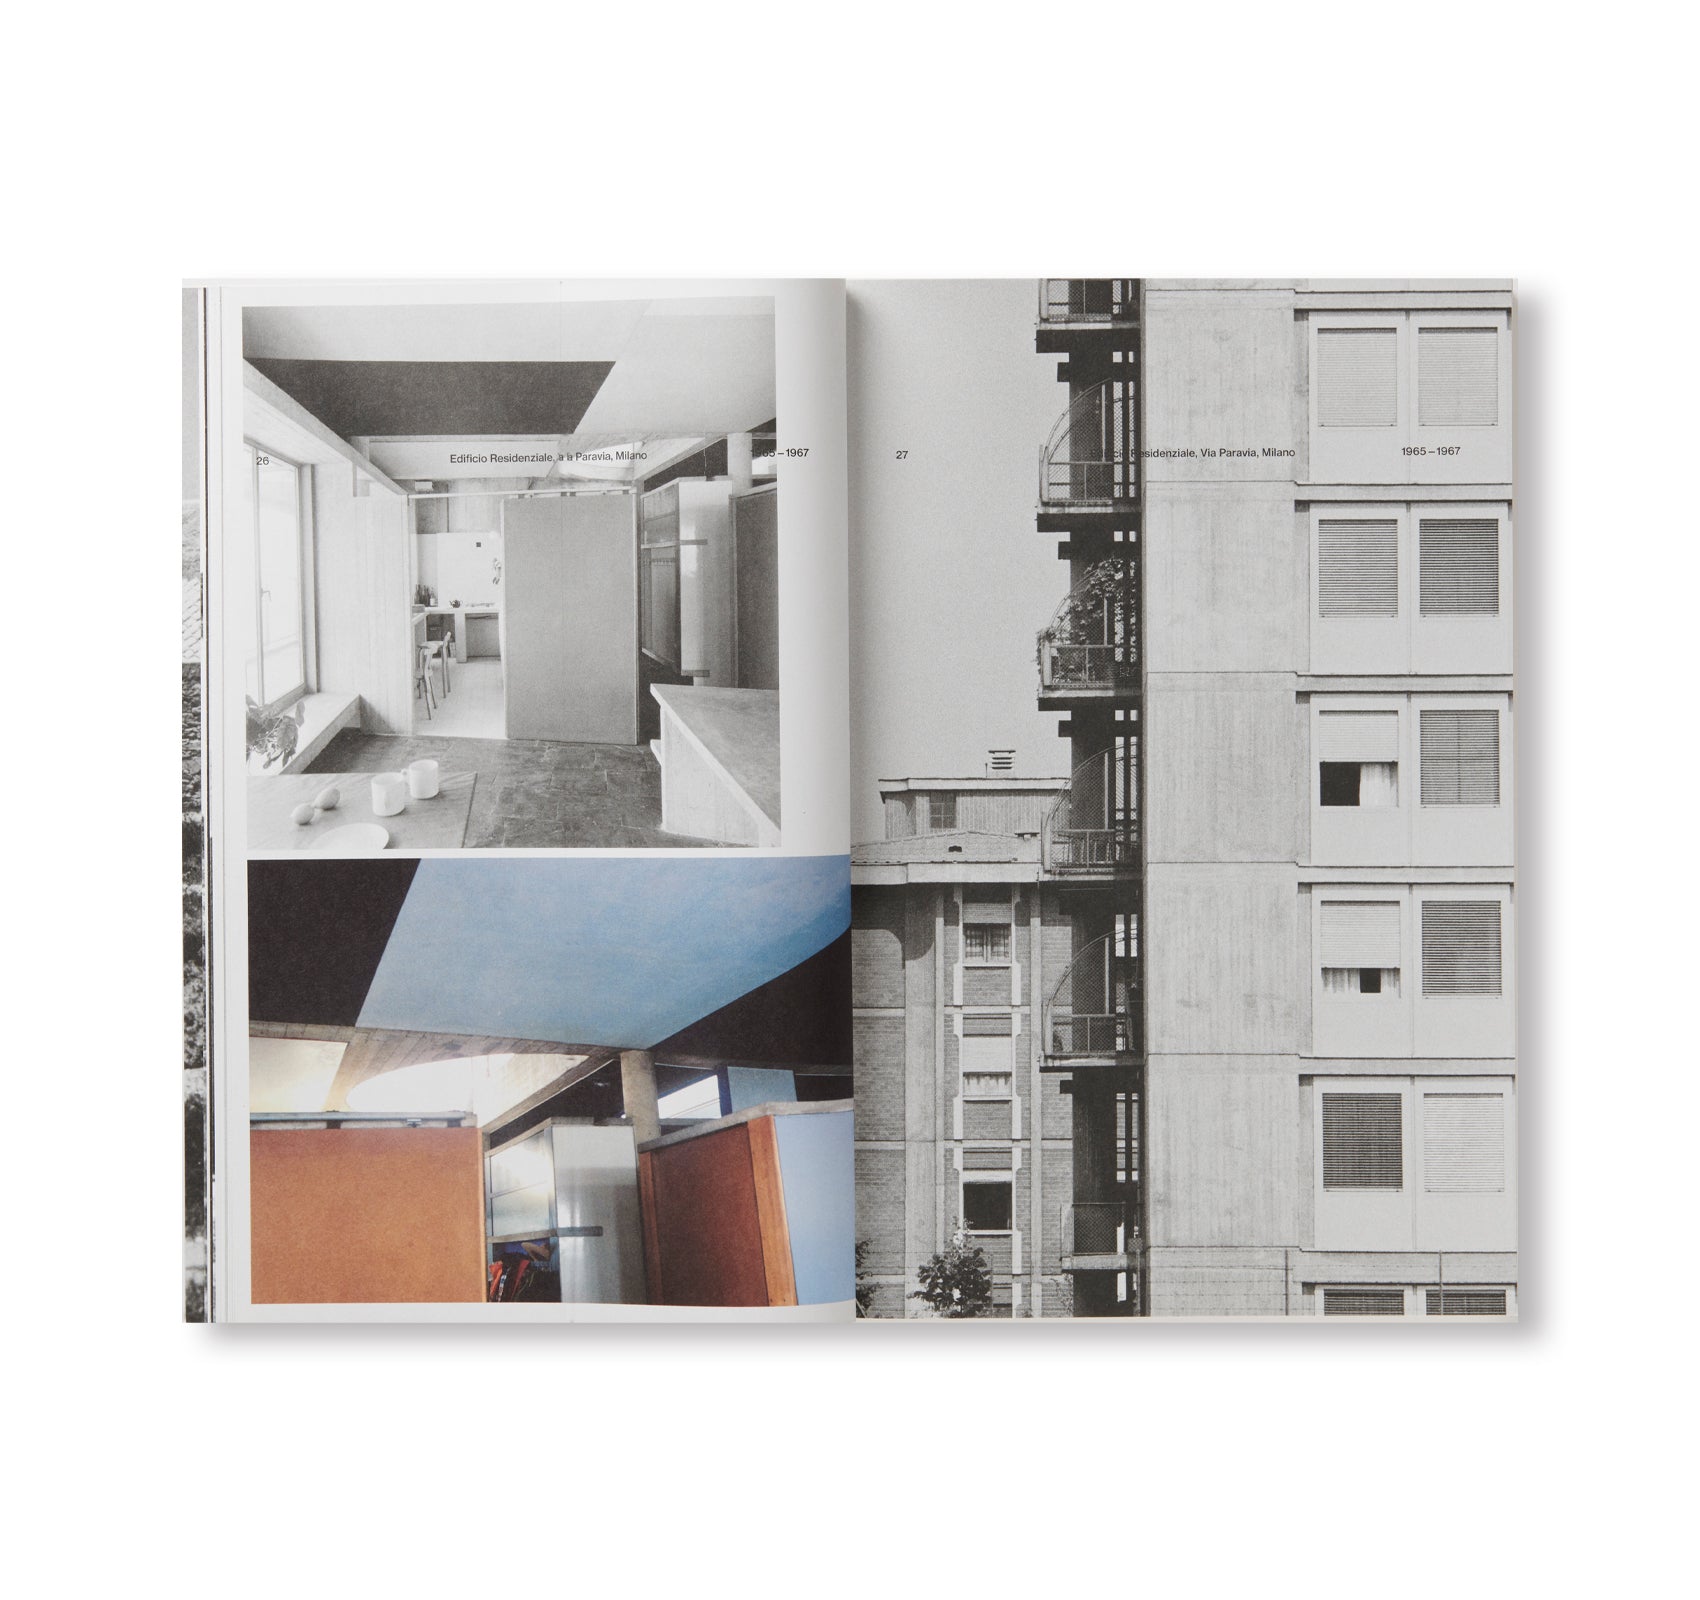 FORAYS BEYOND THE MODERN: THE ARCHITECTURE OF UMBERTO RIVA by Umberto Riva